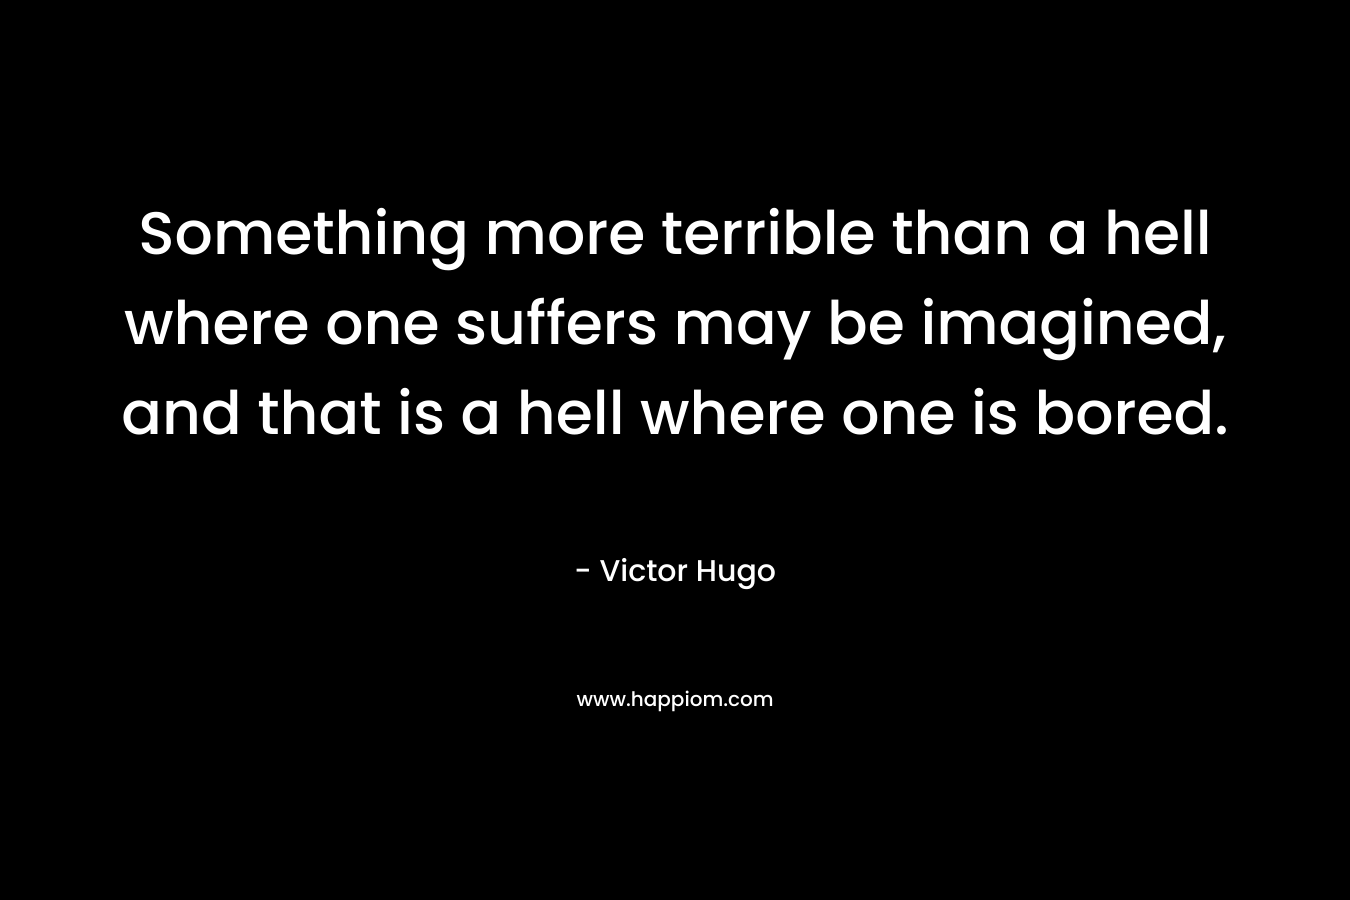 Something more terrible than a hell where one suffers may be imagined, and that is a hell where one is bored. – Victor Hugo